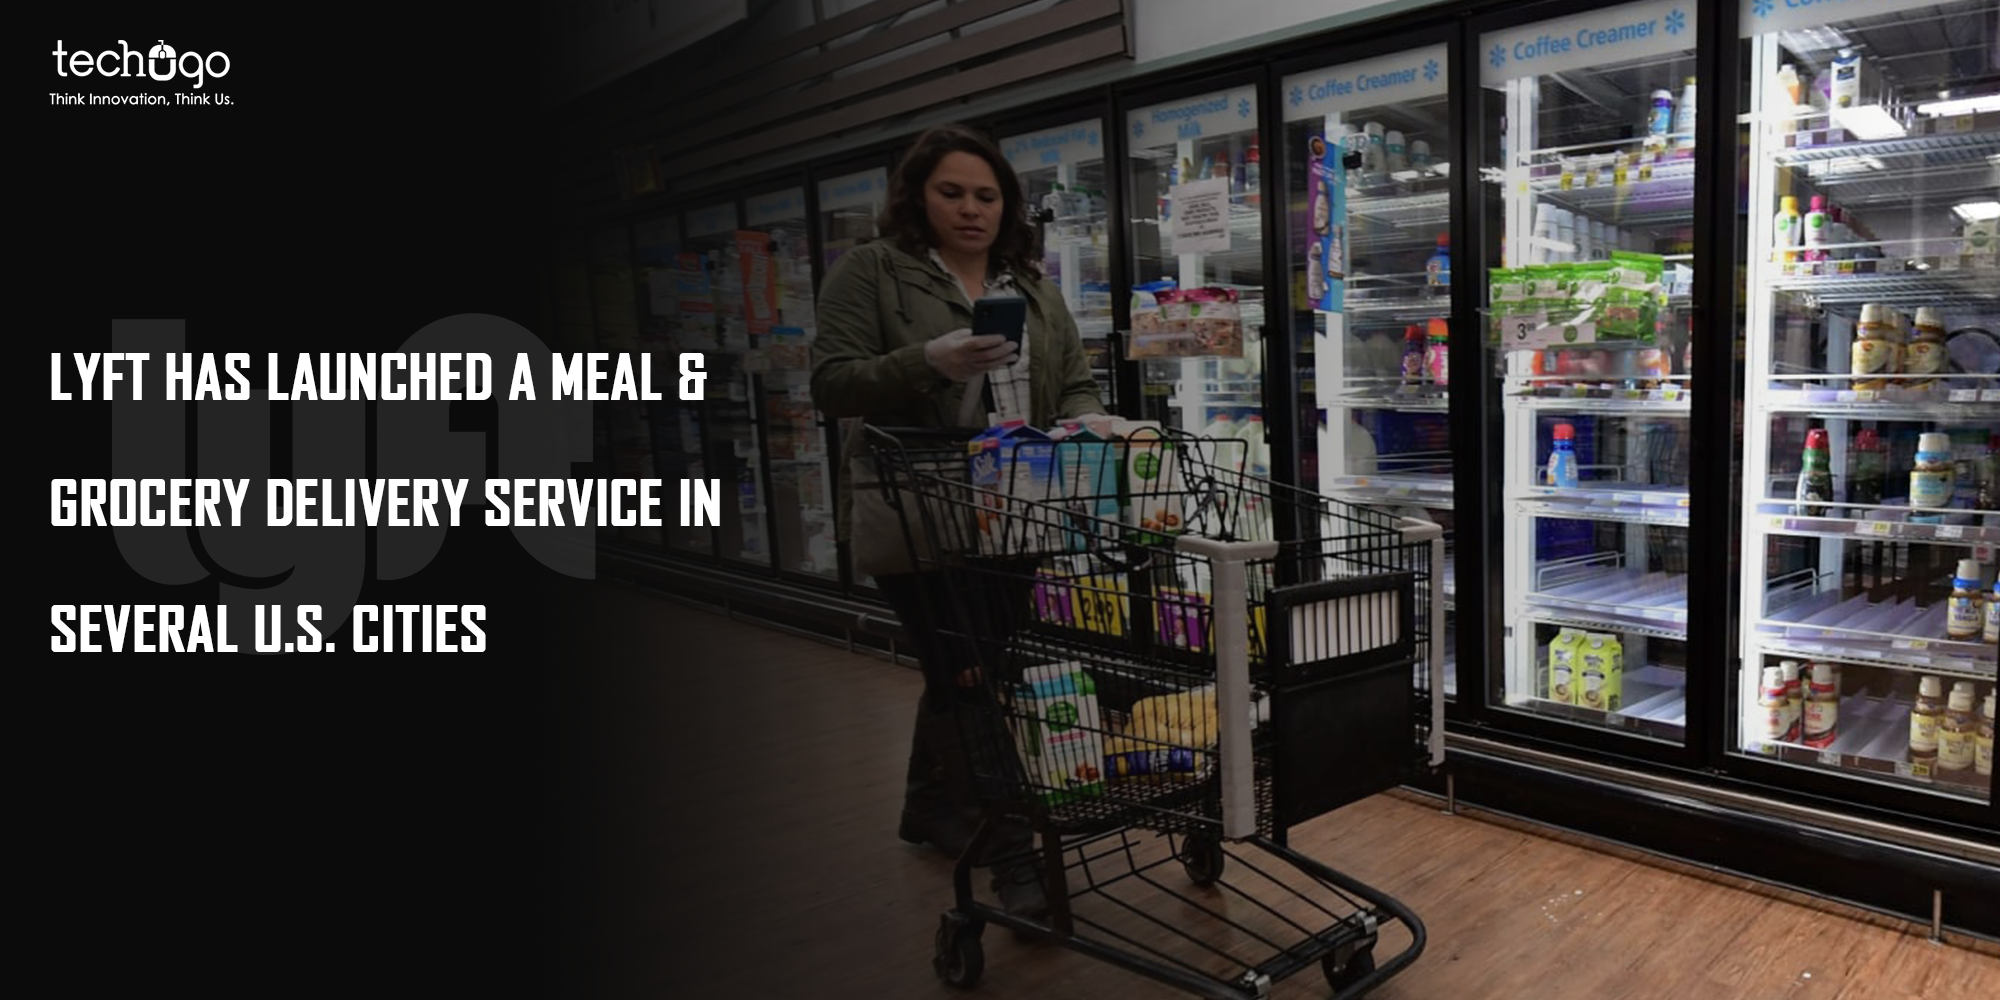 Lyft Has Launched A Meal & Grocery Delivery Service In Several U.S. Cities